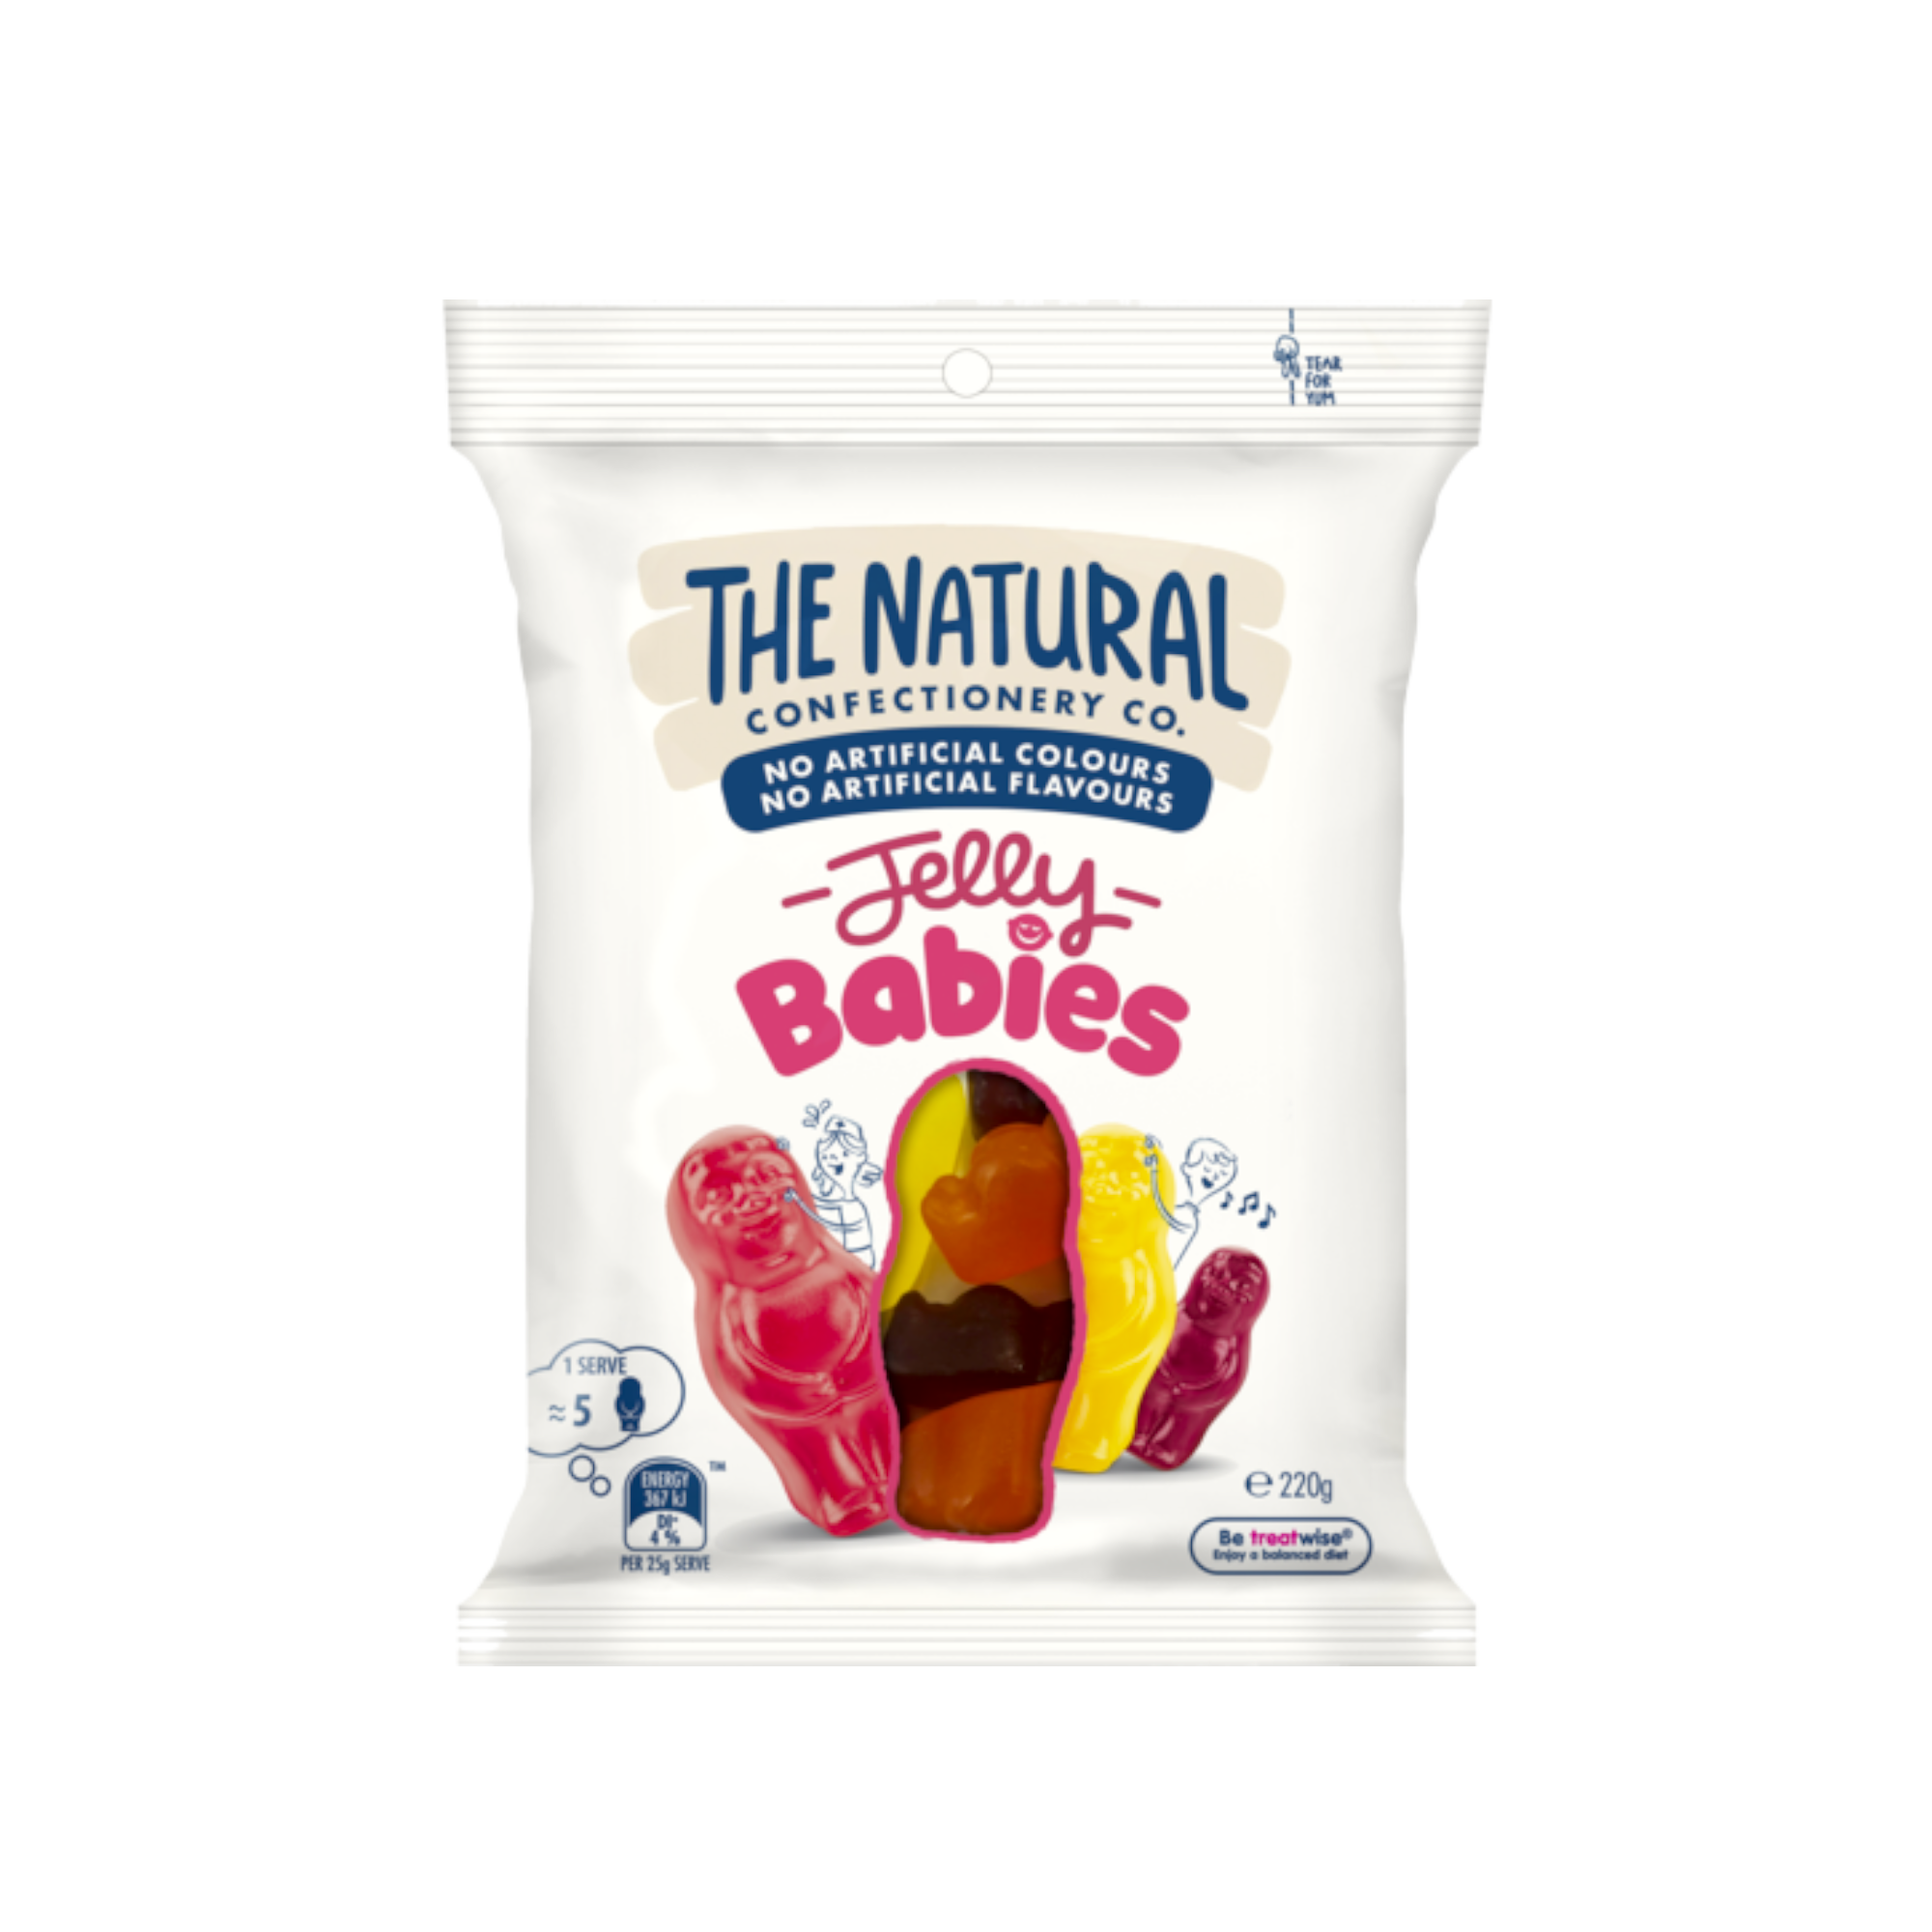 The Natural Confectionary Co. Jelly Babies 220g – Shopifull